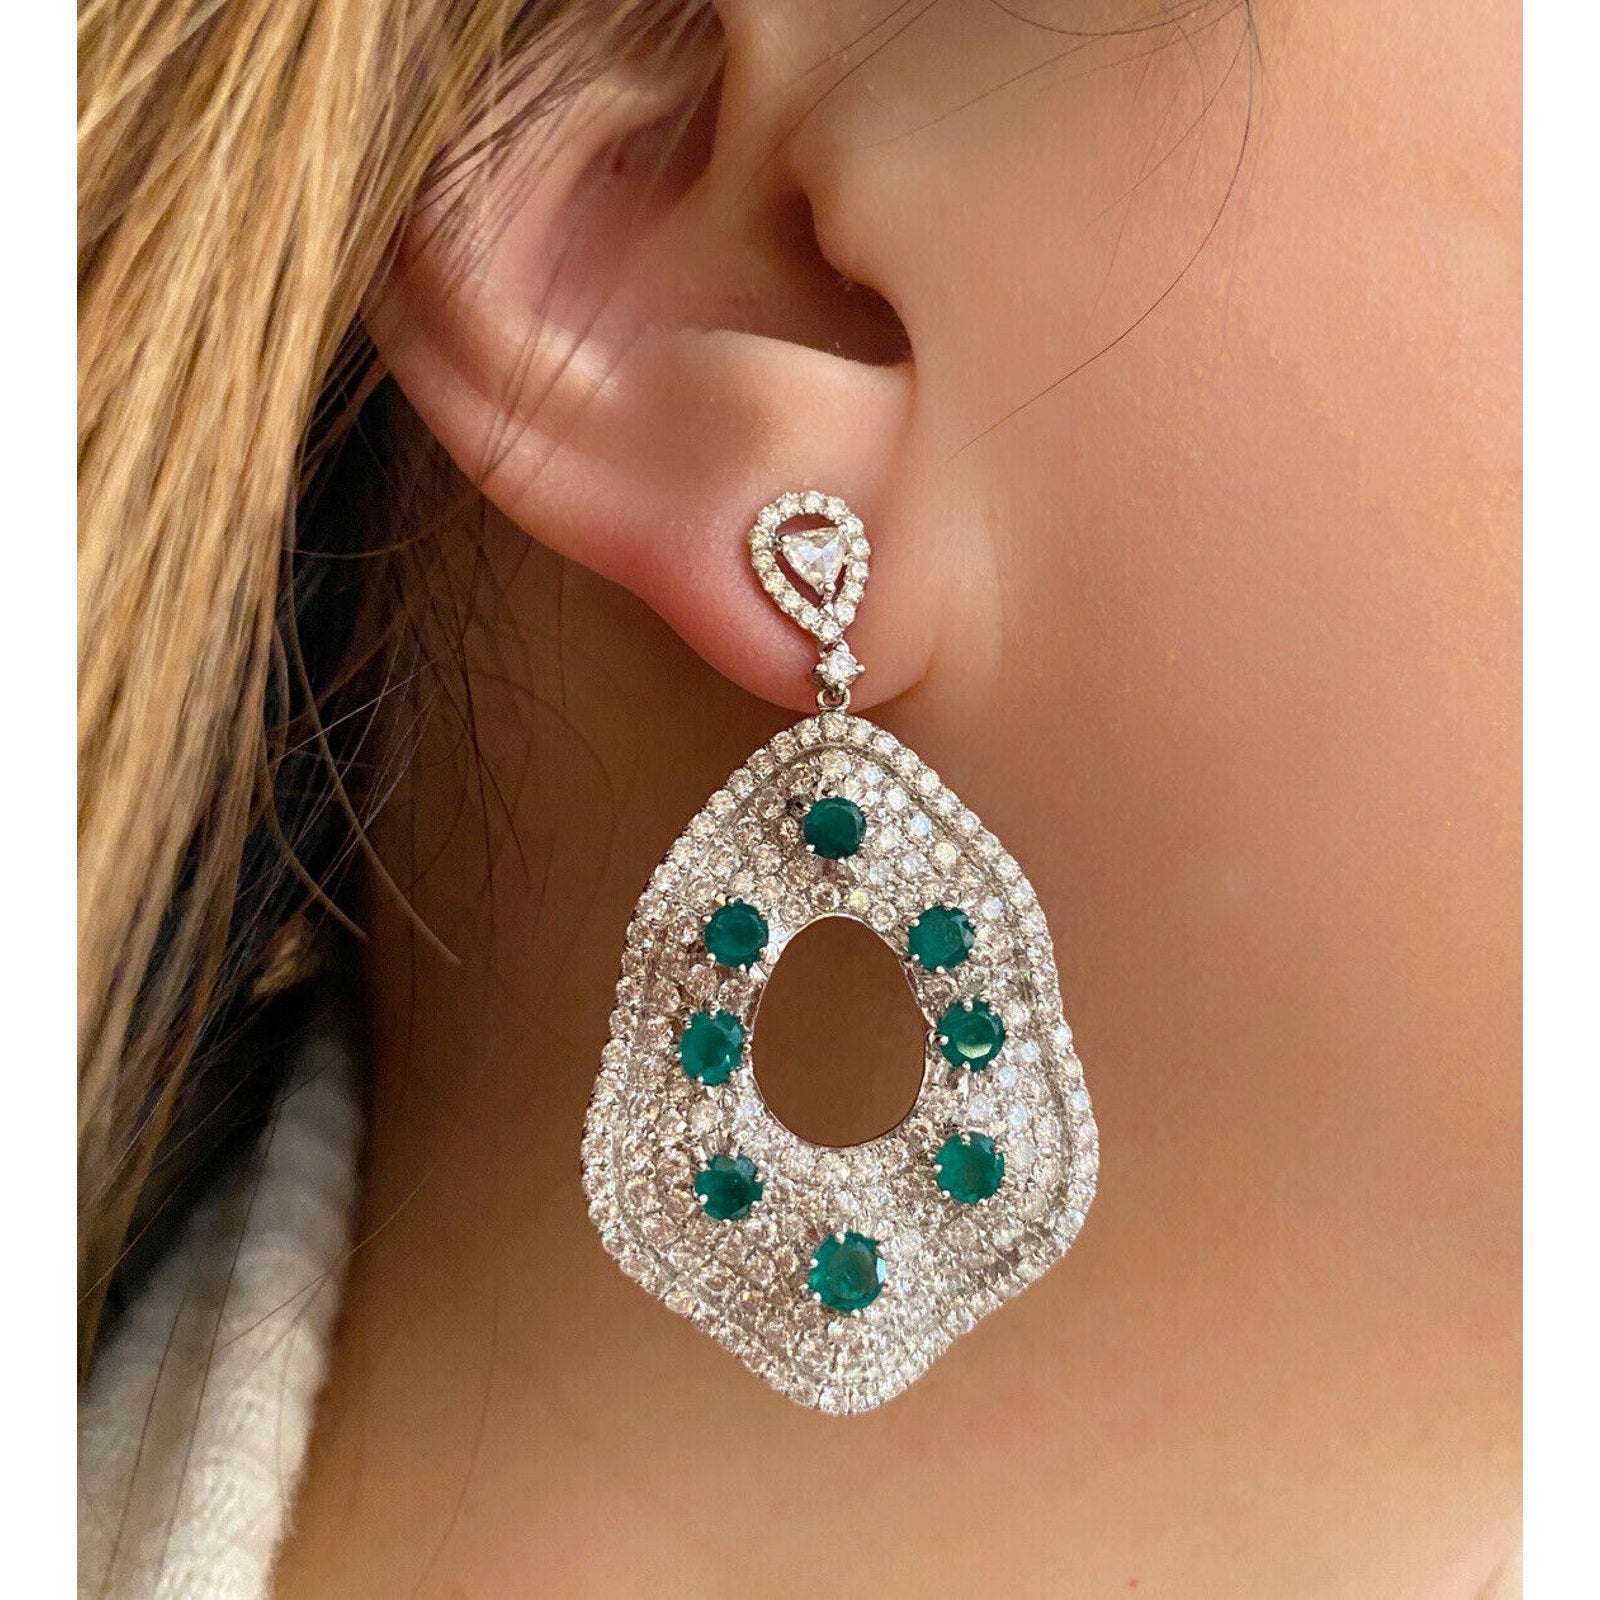 Large Pave Diamond and Emerald Drop Earrings in 18k White Gold - HM1740EE